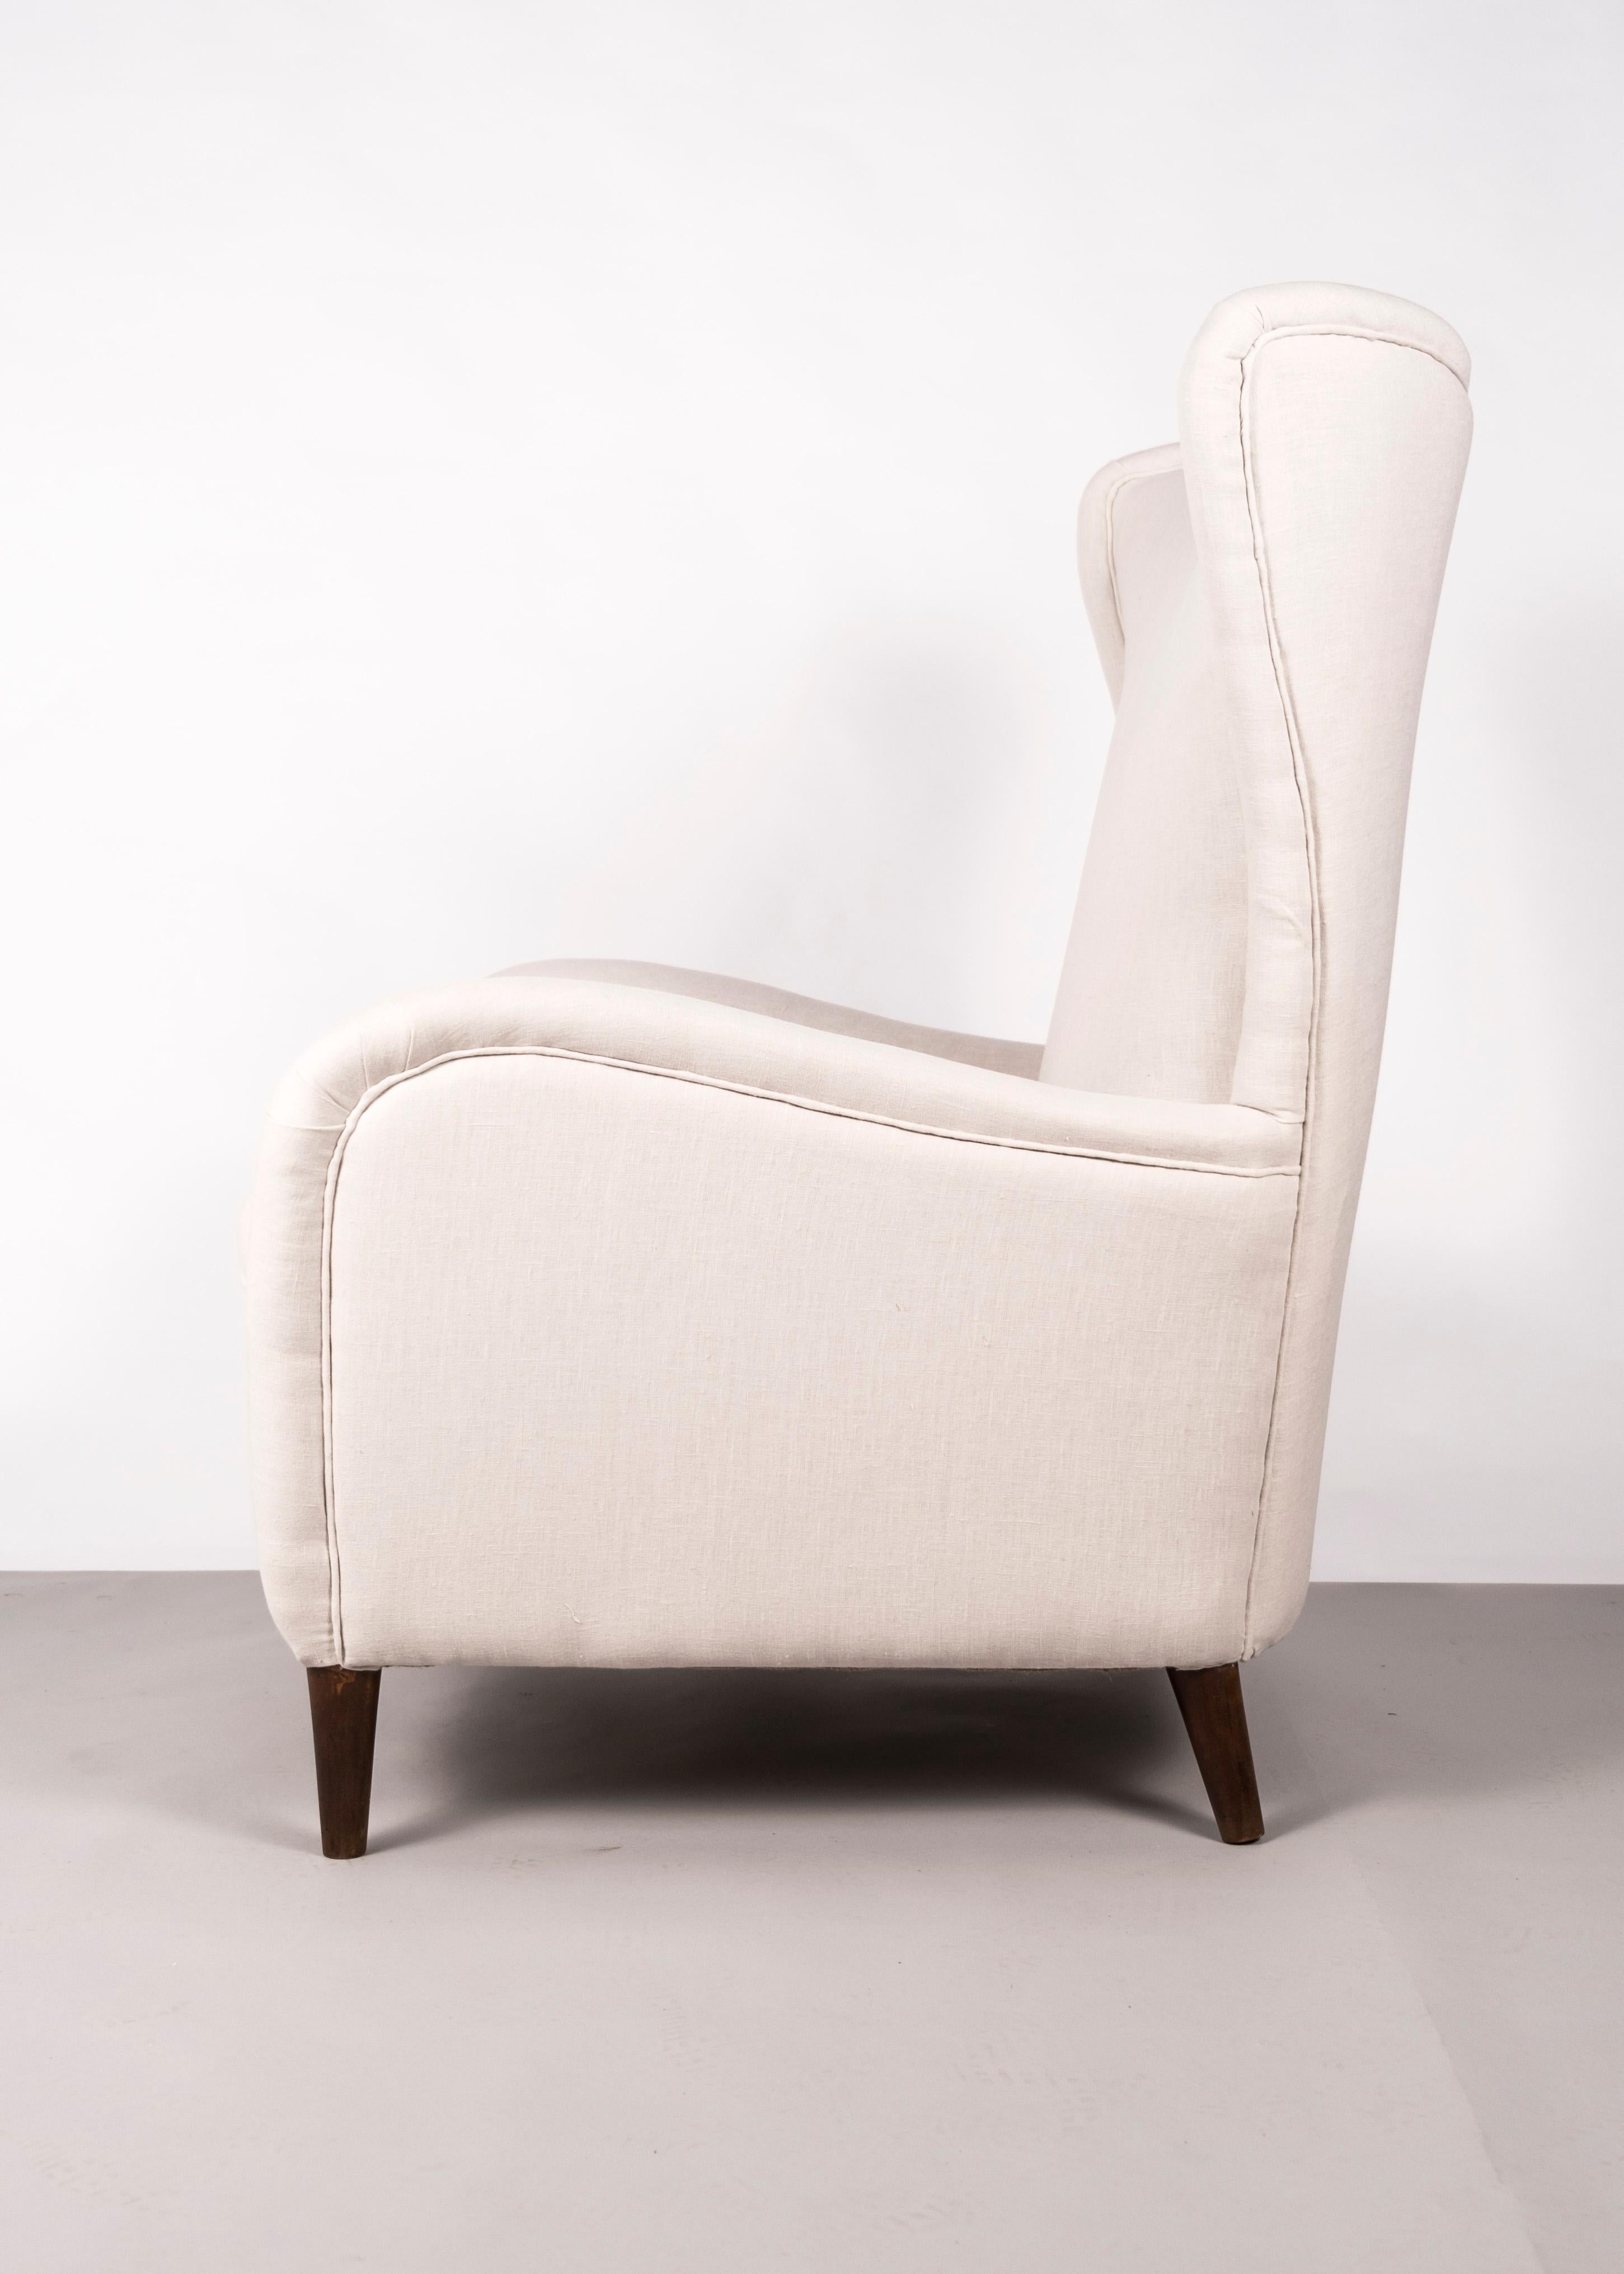 Wooden legs and frame, recently reupholstered in an off-white linen.
Dimensions: 107 x 80 x 90 cm.